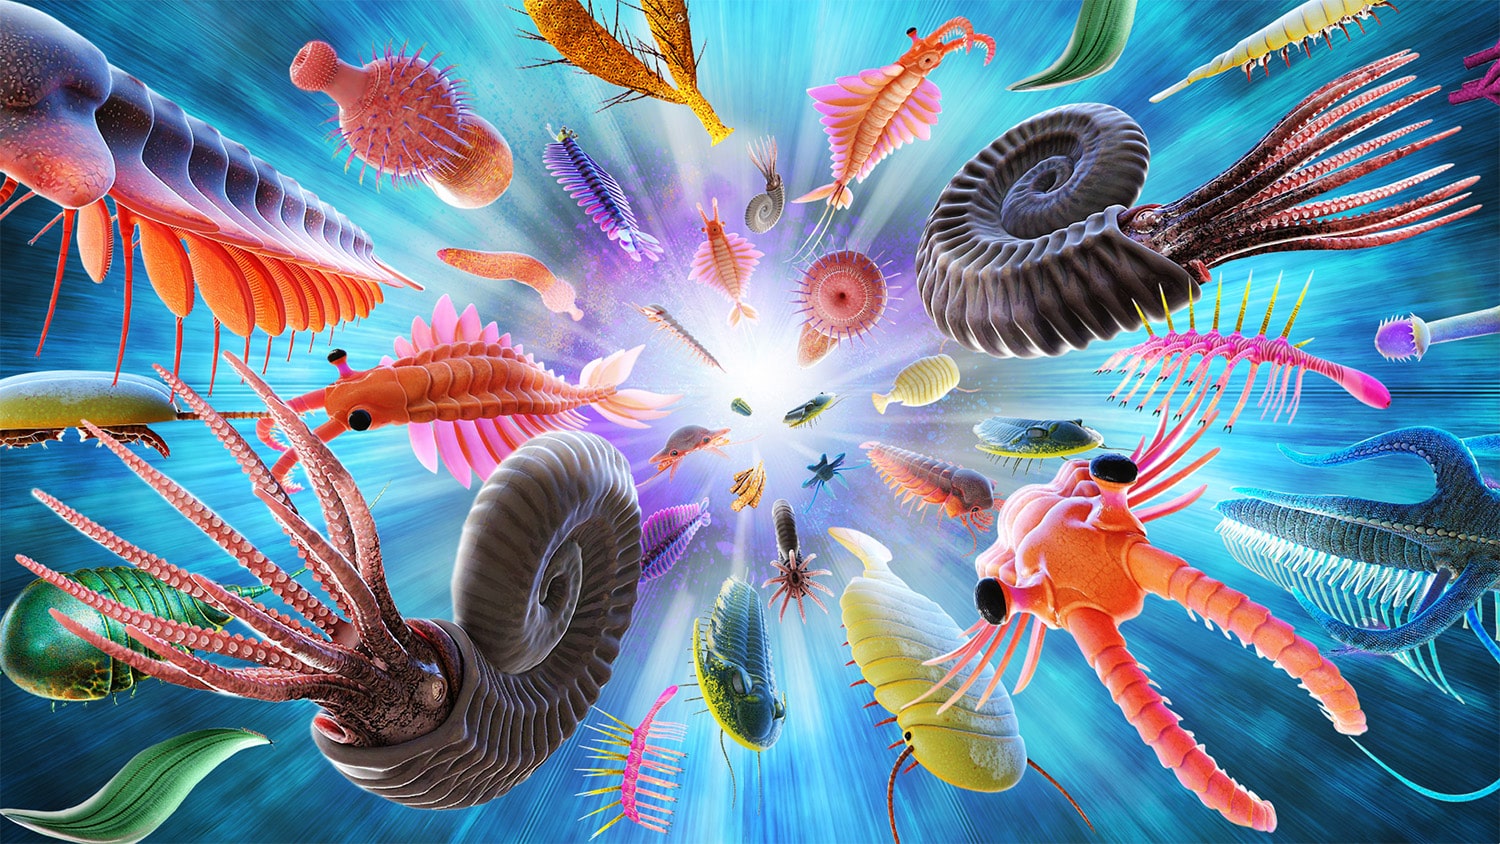 26 interesting facts about Cambrian Explosion